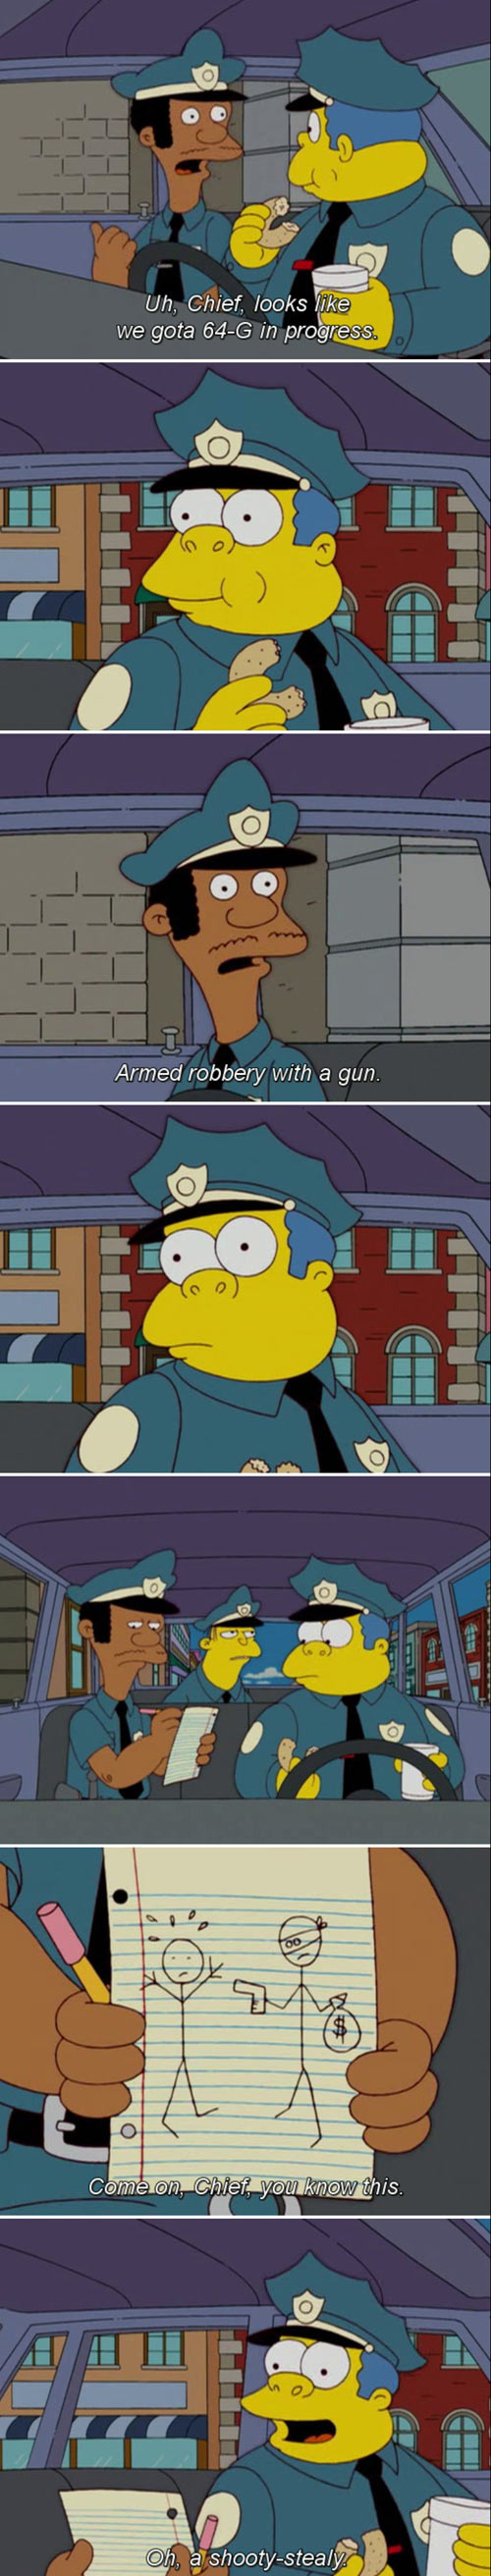 Armed robbery with a gun.